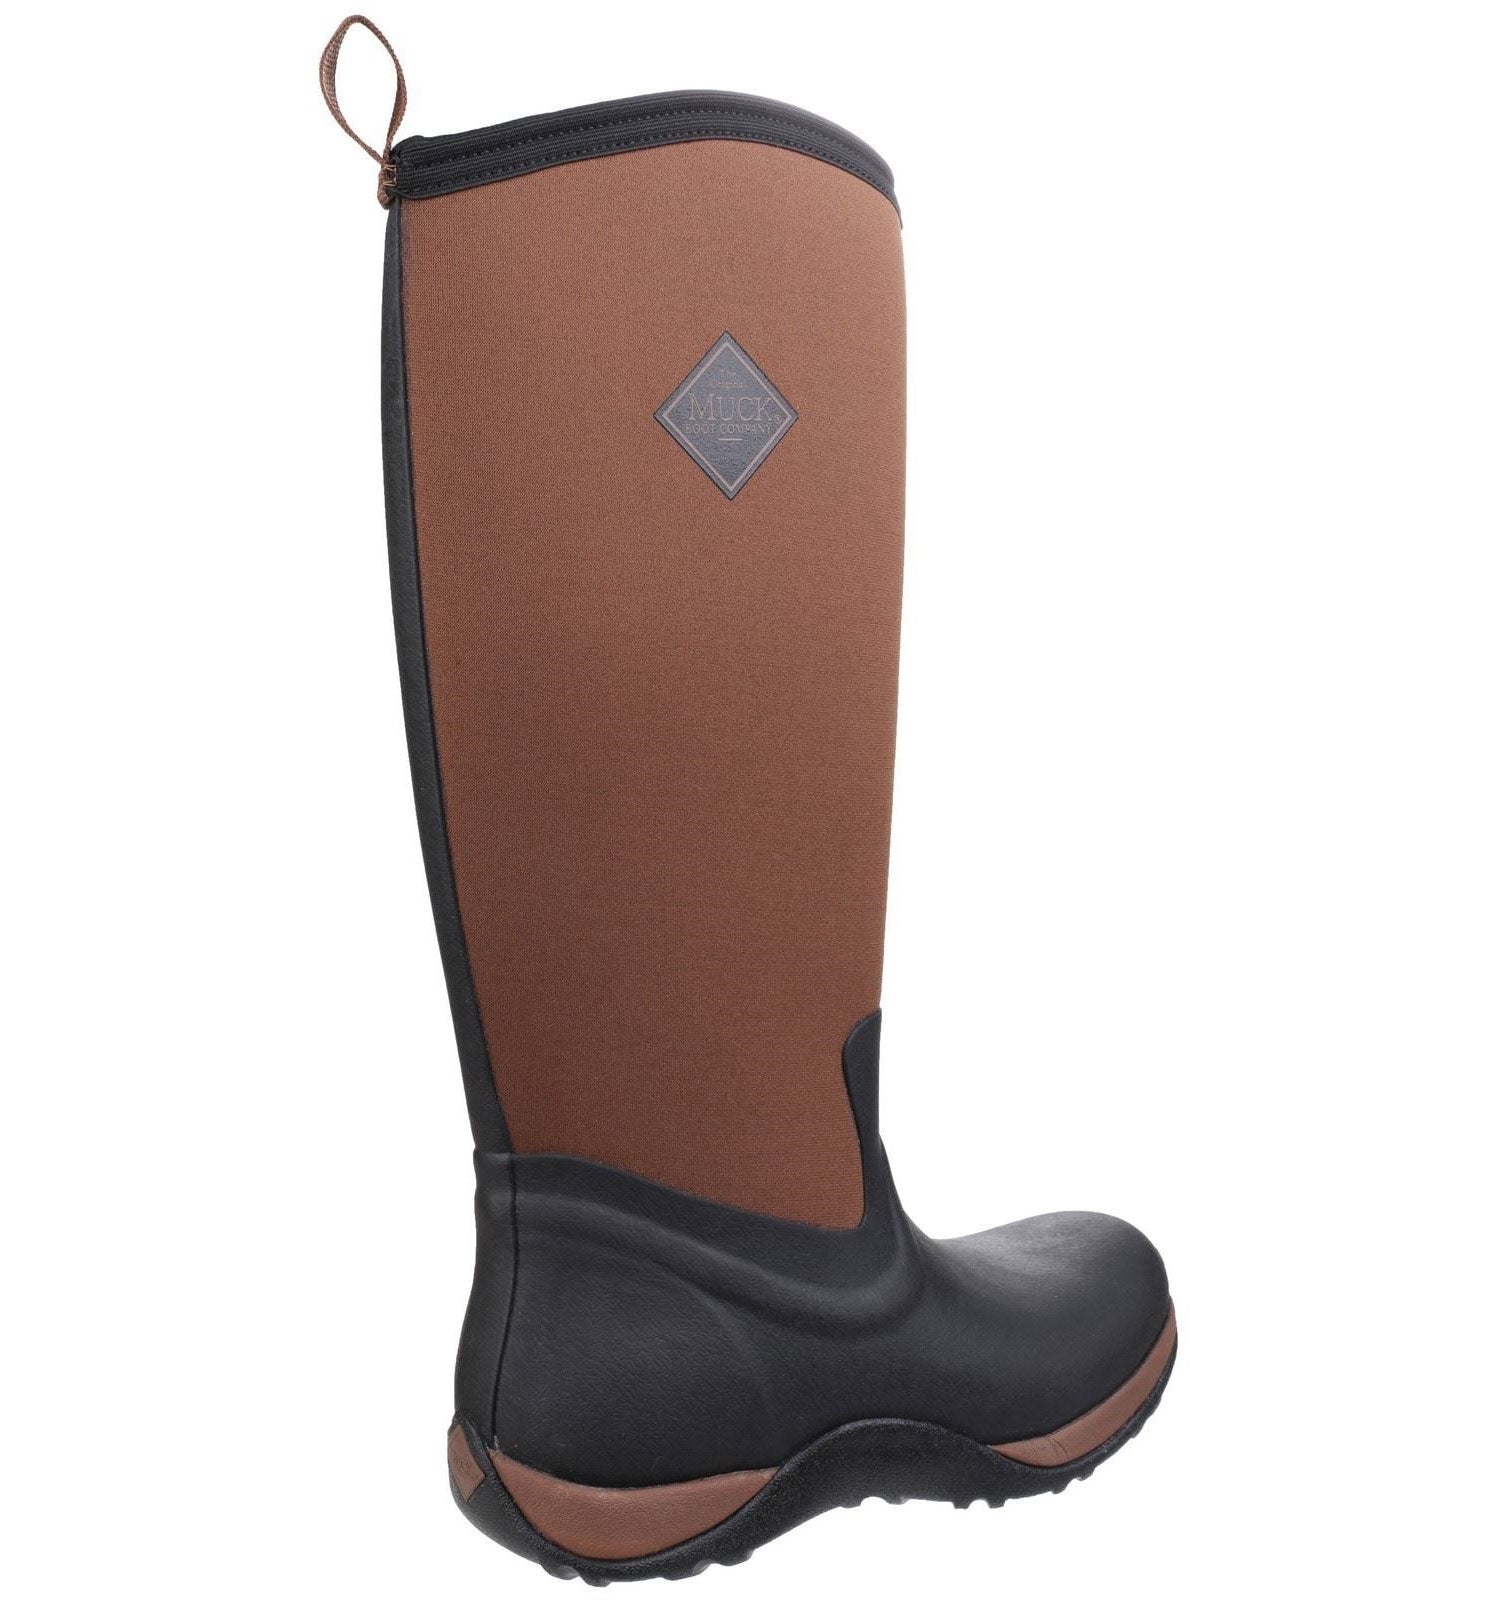 Muck Boots Womens Arctic Adventure Tall Boots in Black Tan 